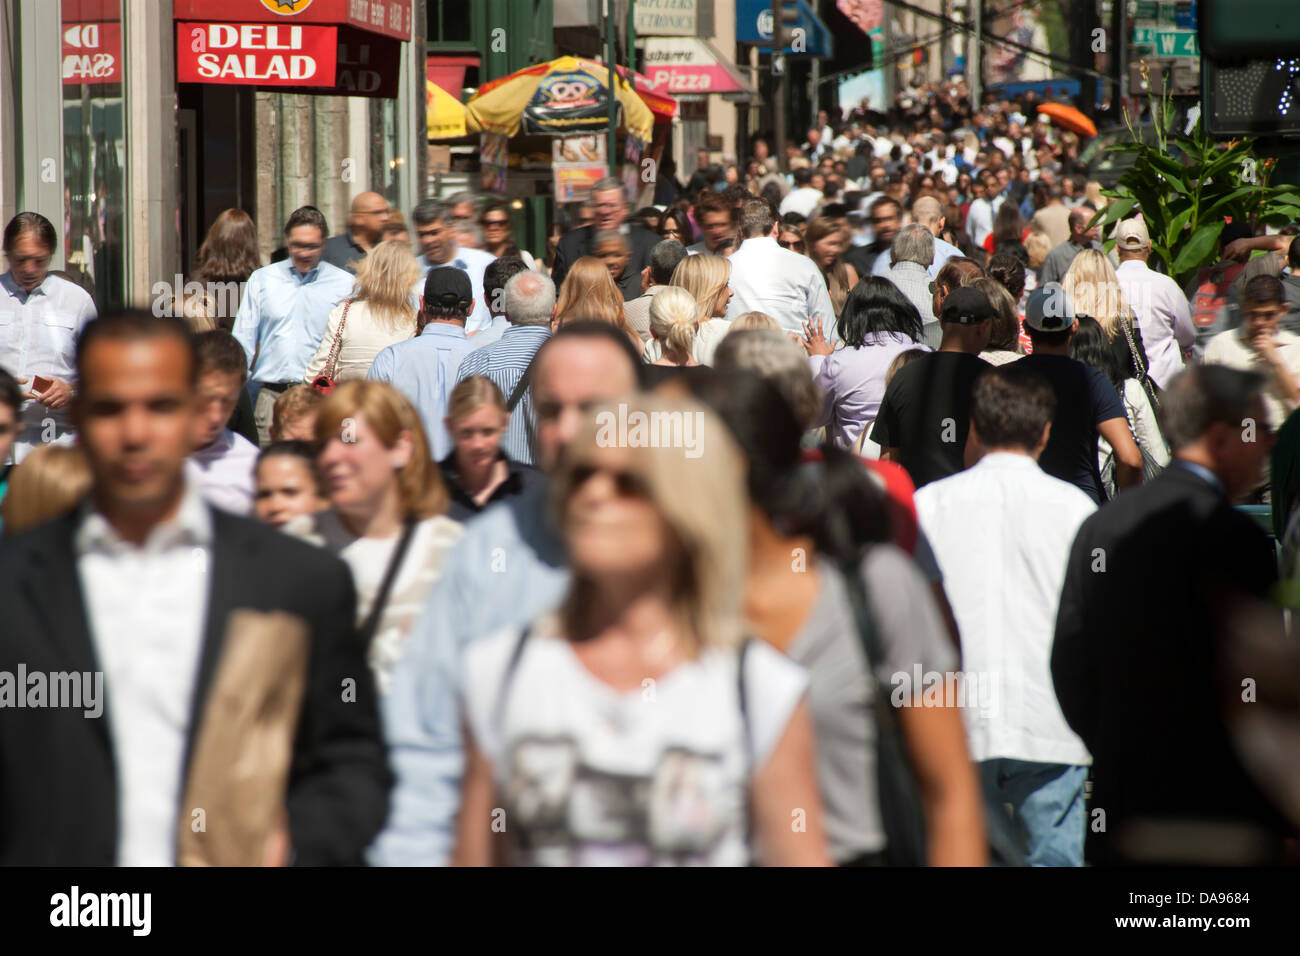 LUNCHTIME CROWD FIFTH AVENUE MIDTOWN MANHATTAN NEW YORK CITY USA Stock Photo